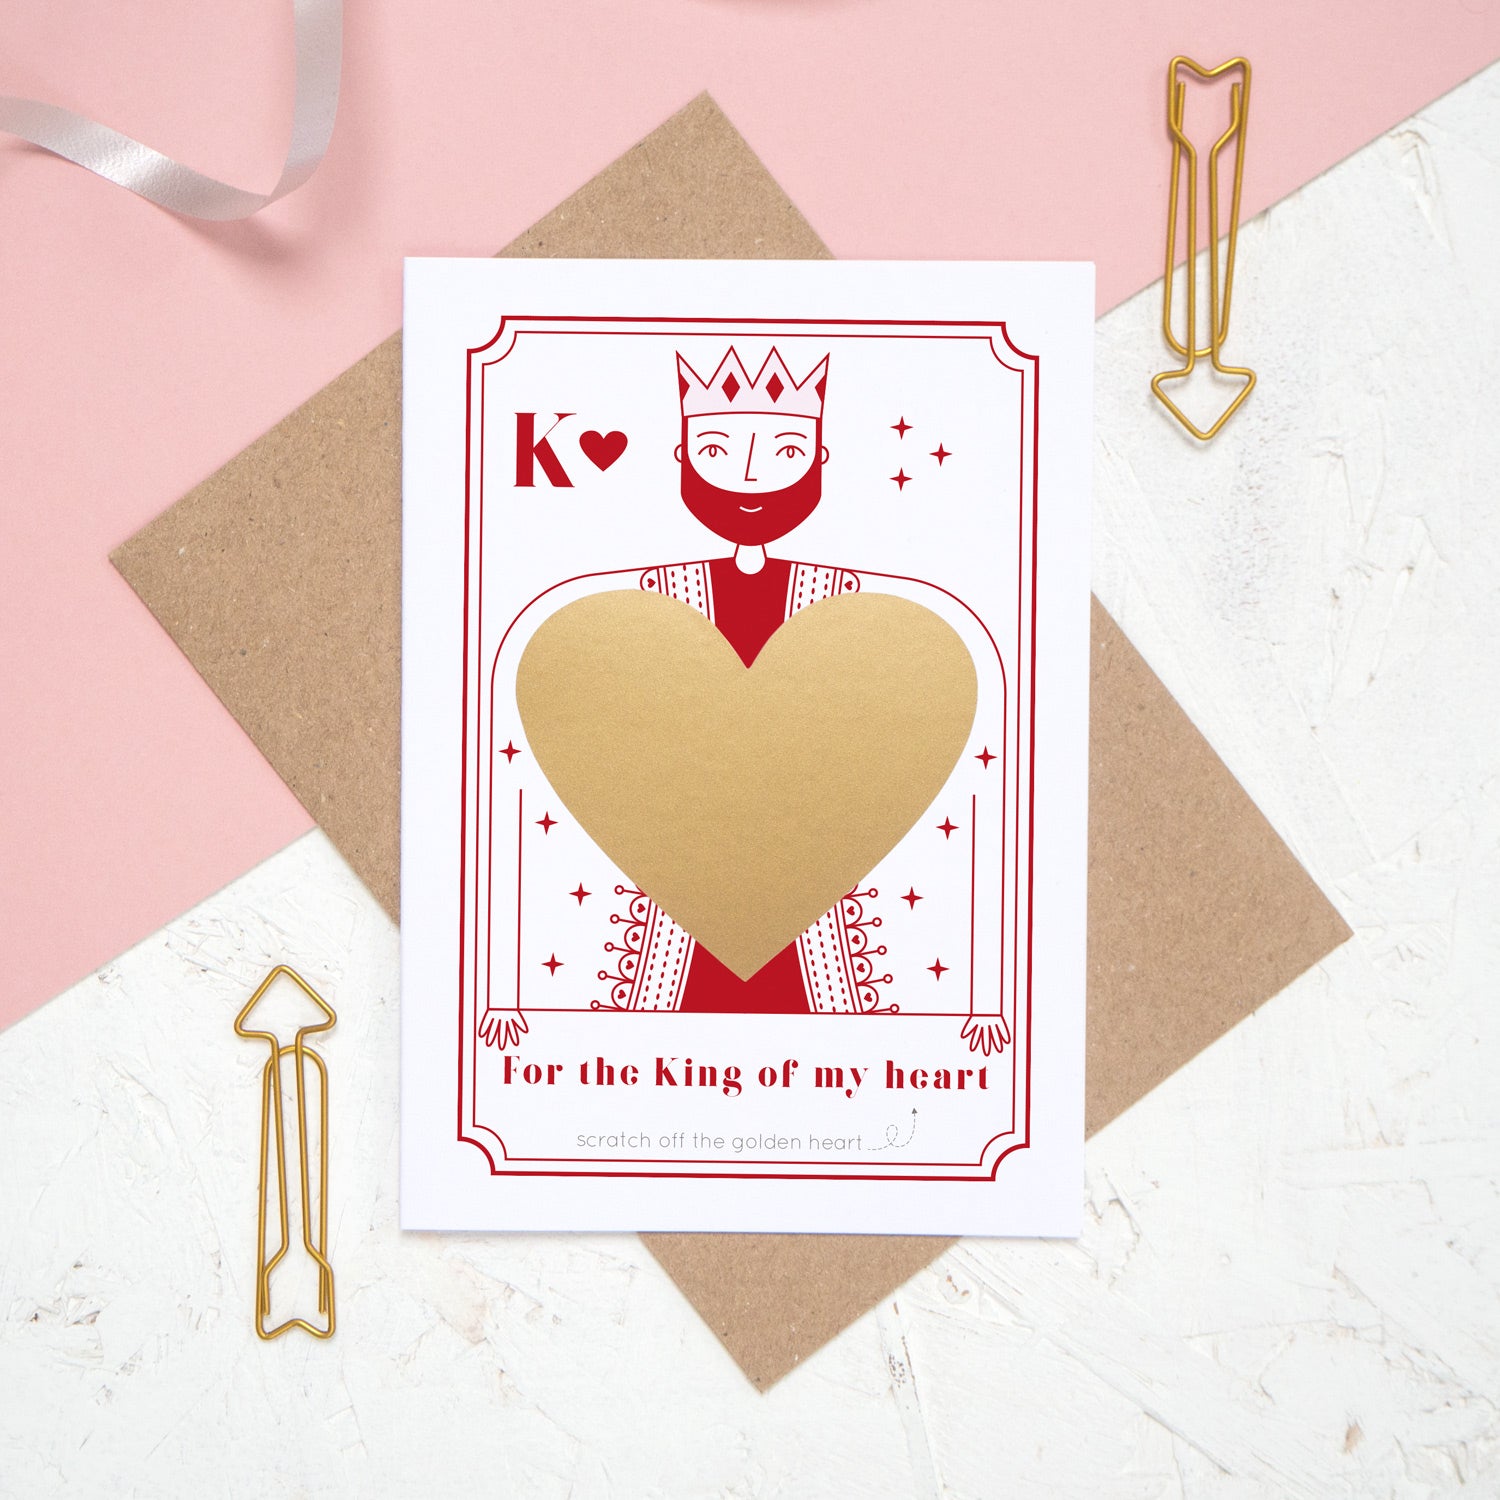 A king of my heart scratch and reveal card featuring a gold panel hiding the secret message. Shot on a pink background.